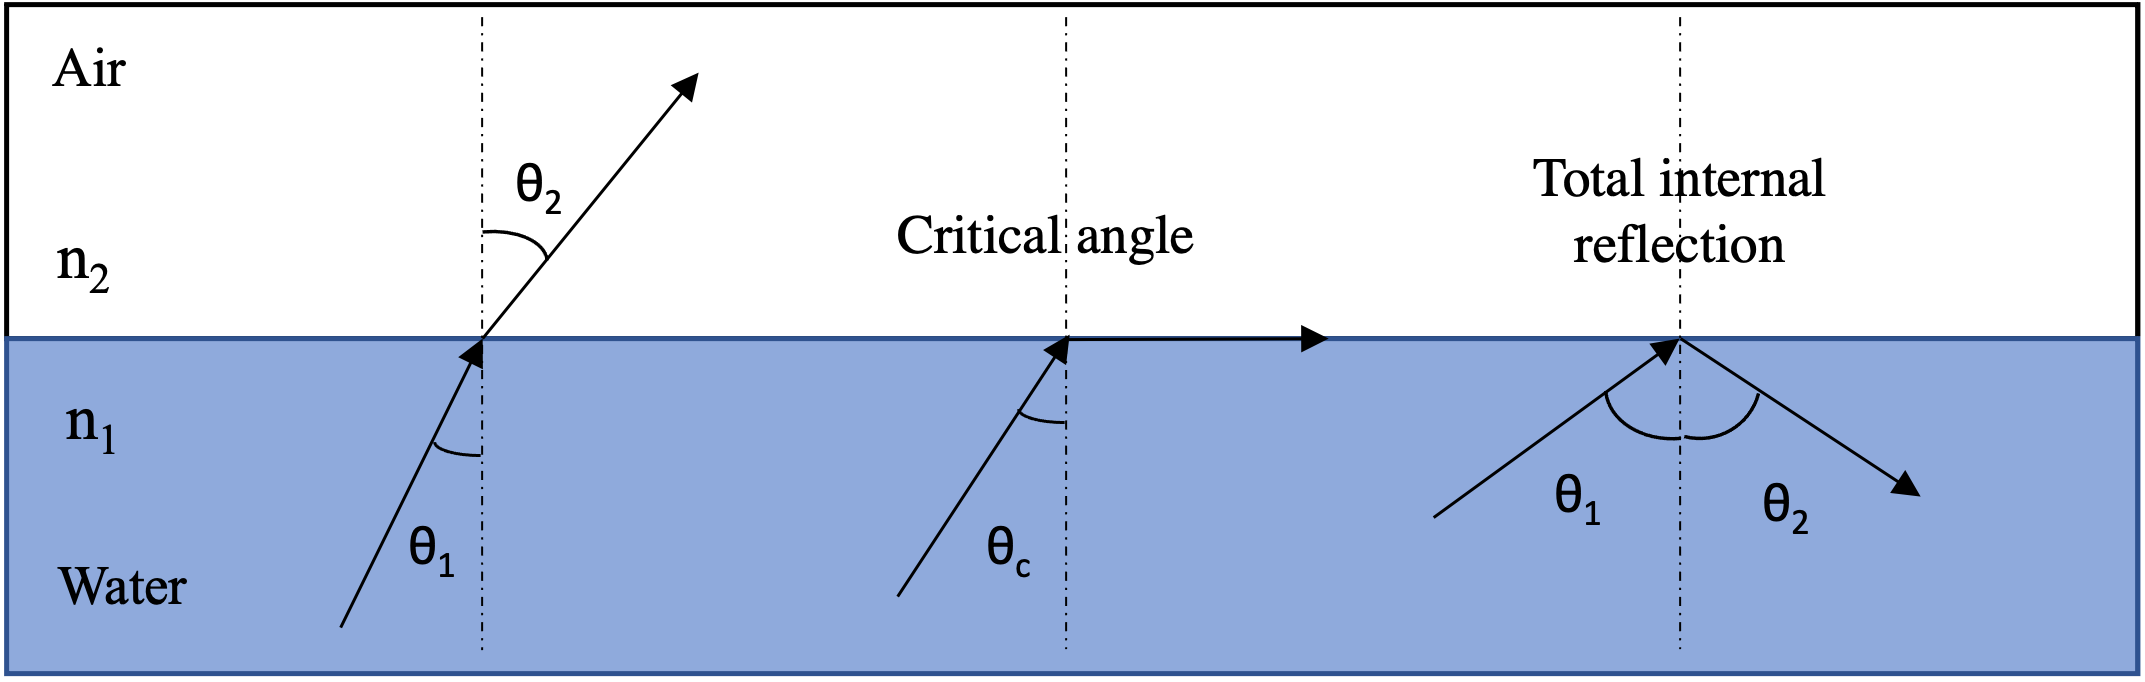 Critical Angle and Total Internal Reflection Diagram